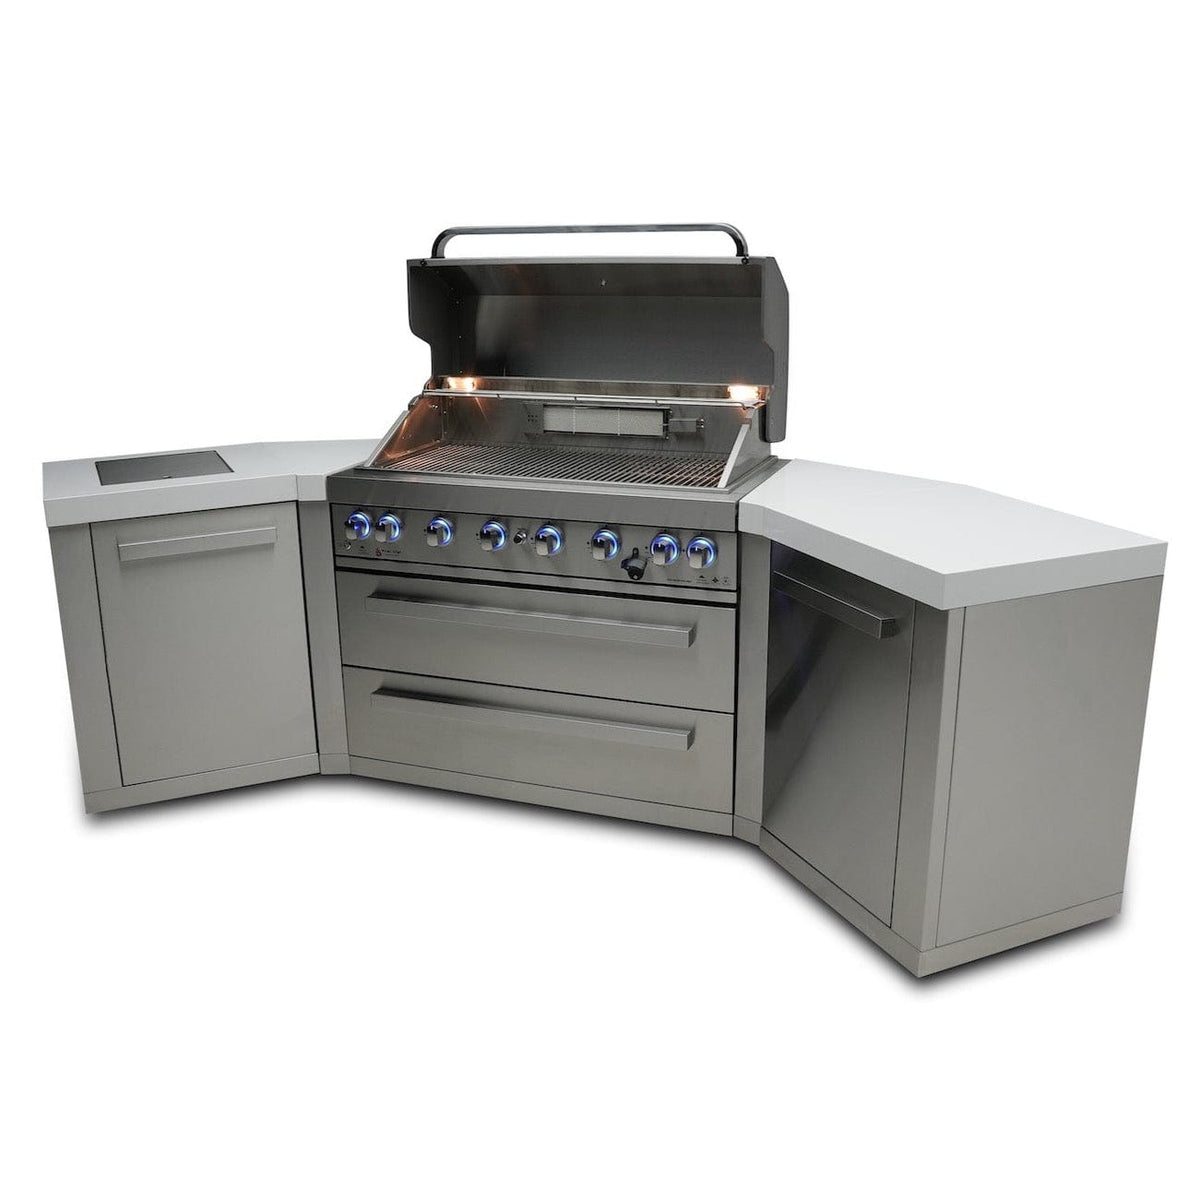 Mont Alpi Islands Mont Alpi 805 Island with Two 45 Degree Corners/ 6-Burner Grill, 2 Infrared Burners, Stainless Steel / MAi805-45